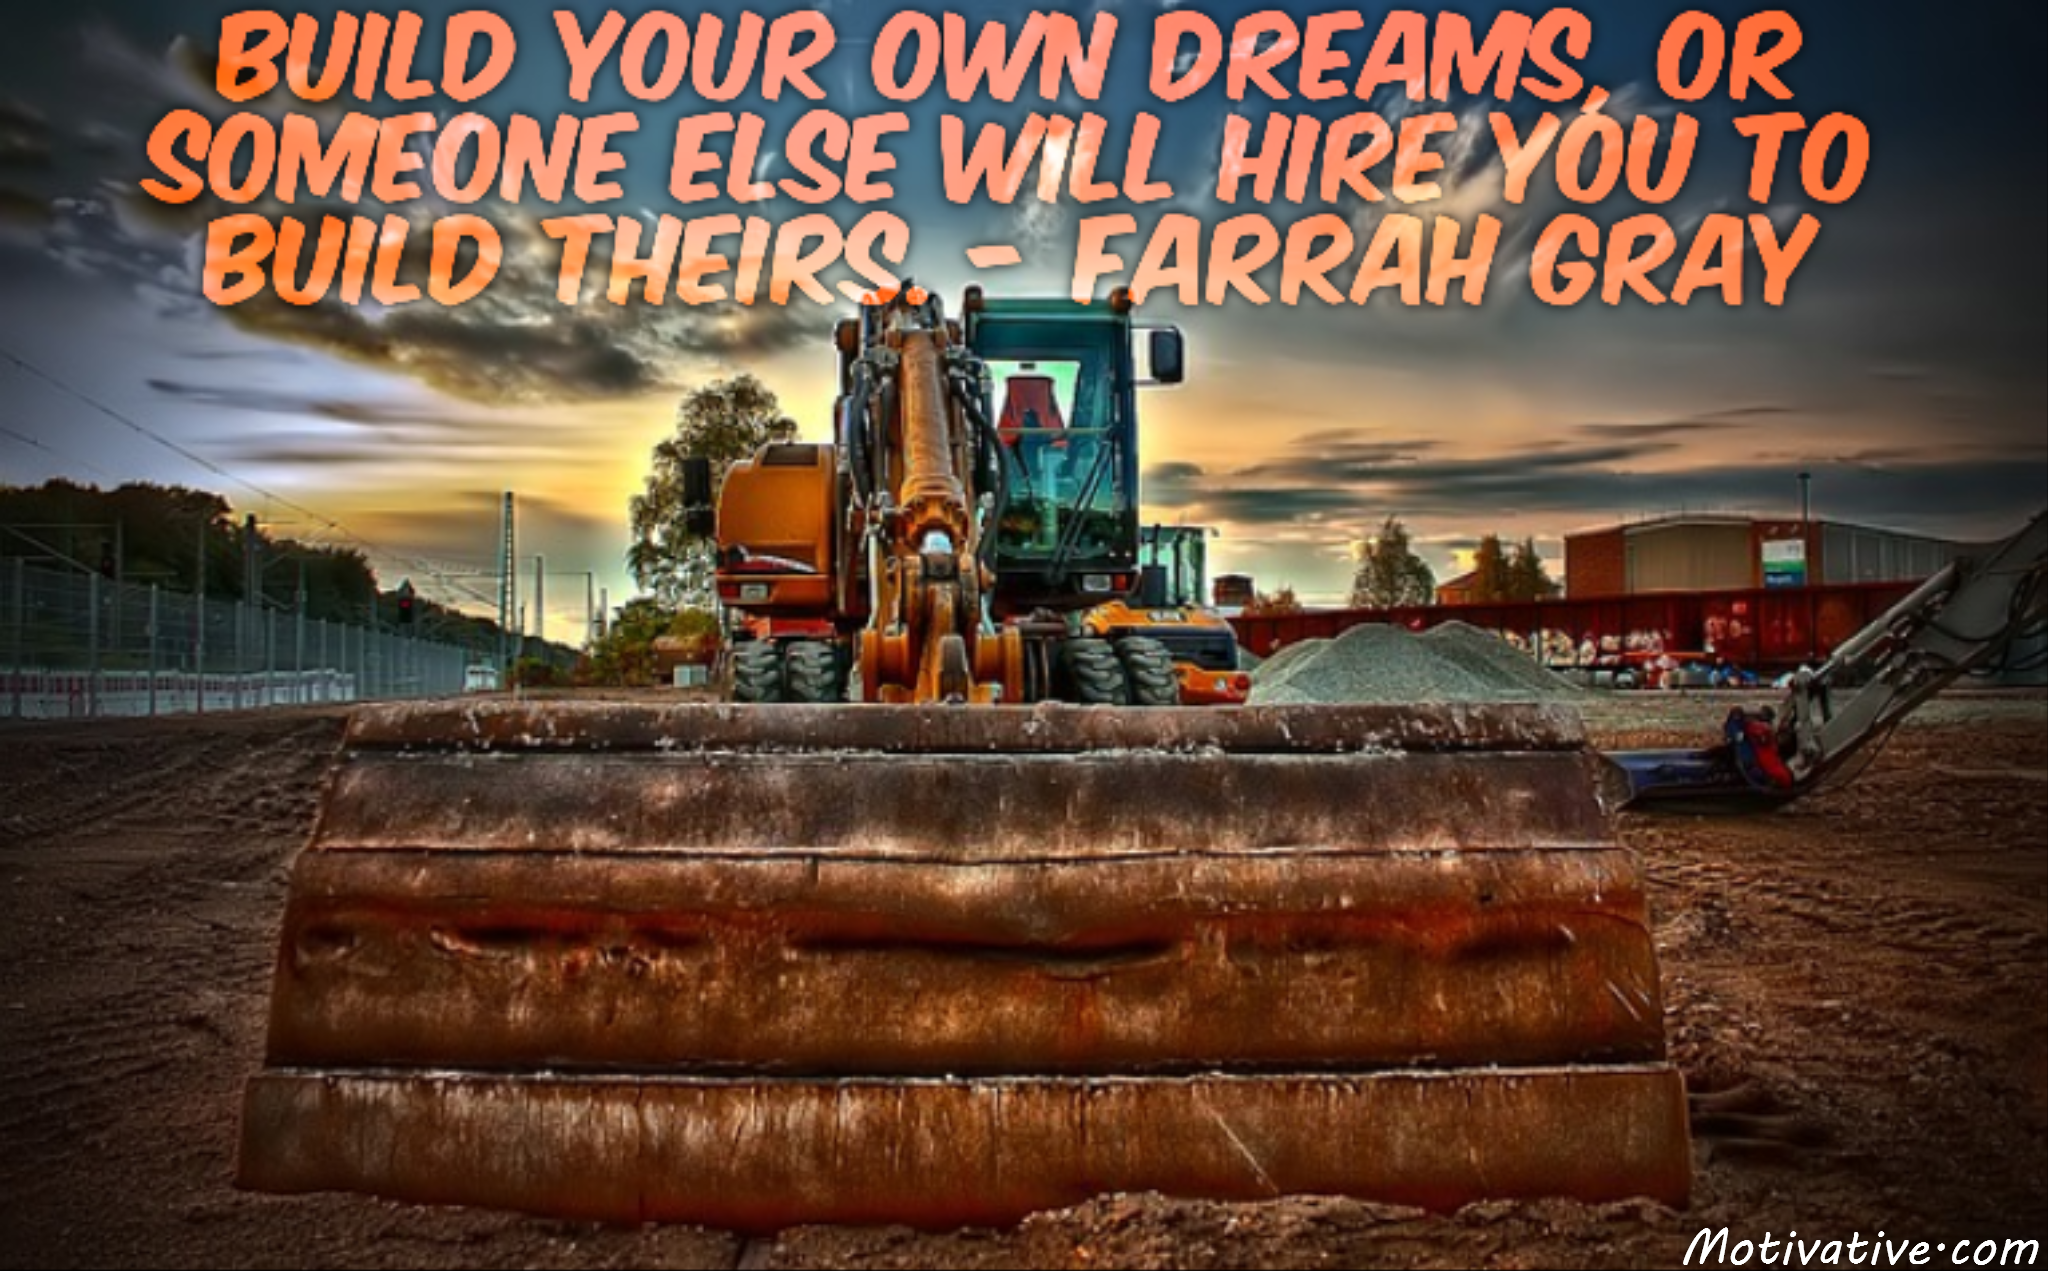 Build your own dreams, or someone else will hire you to build theirs. – Farrah Gray